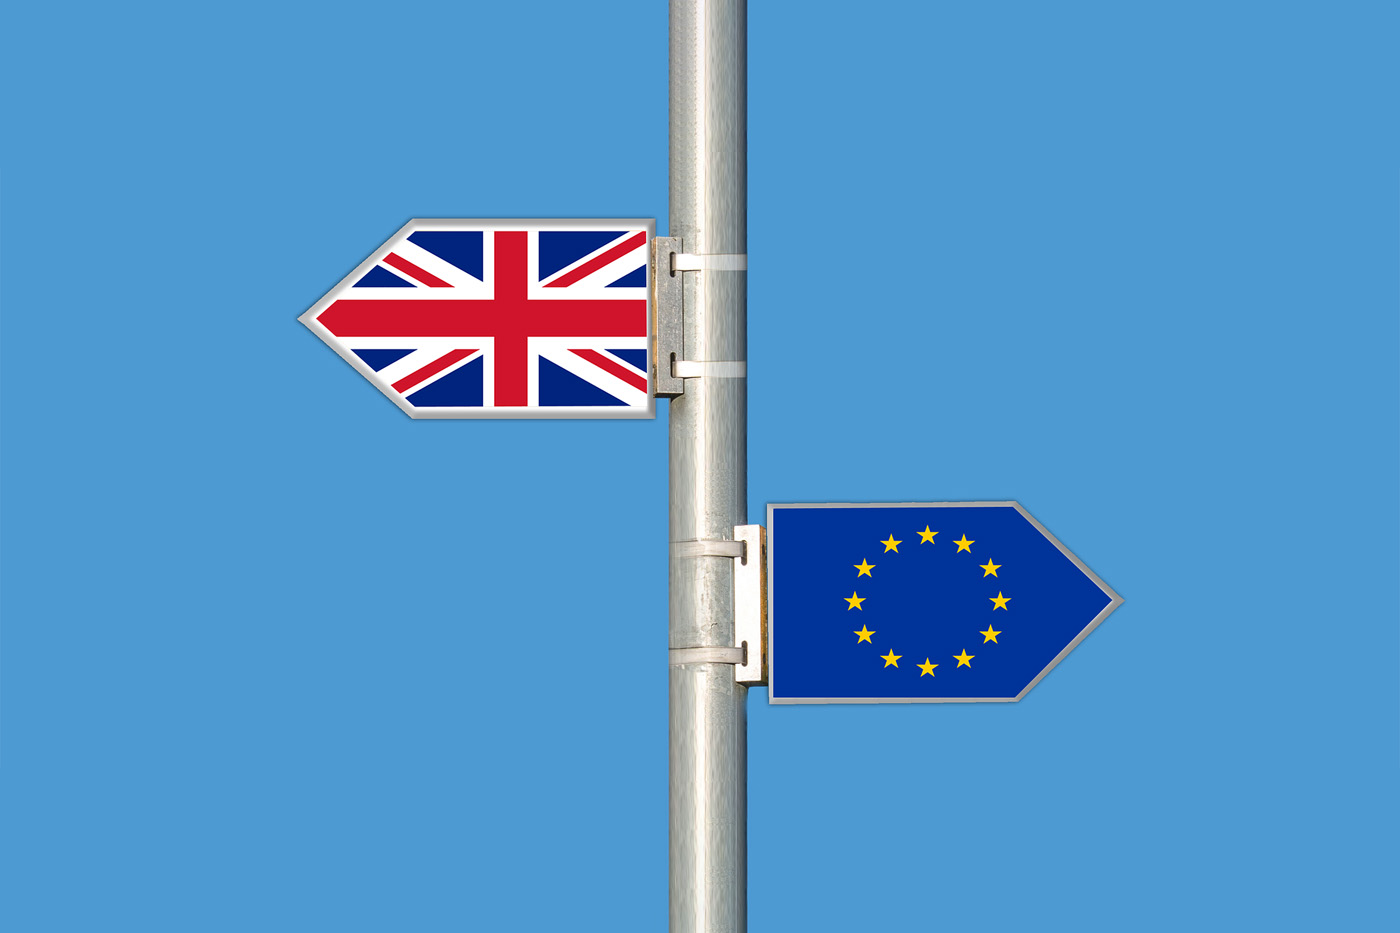 signs indicating the United Kingdom to the left and the European Union to the right